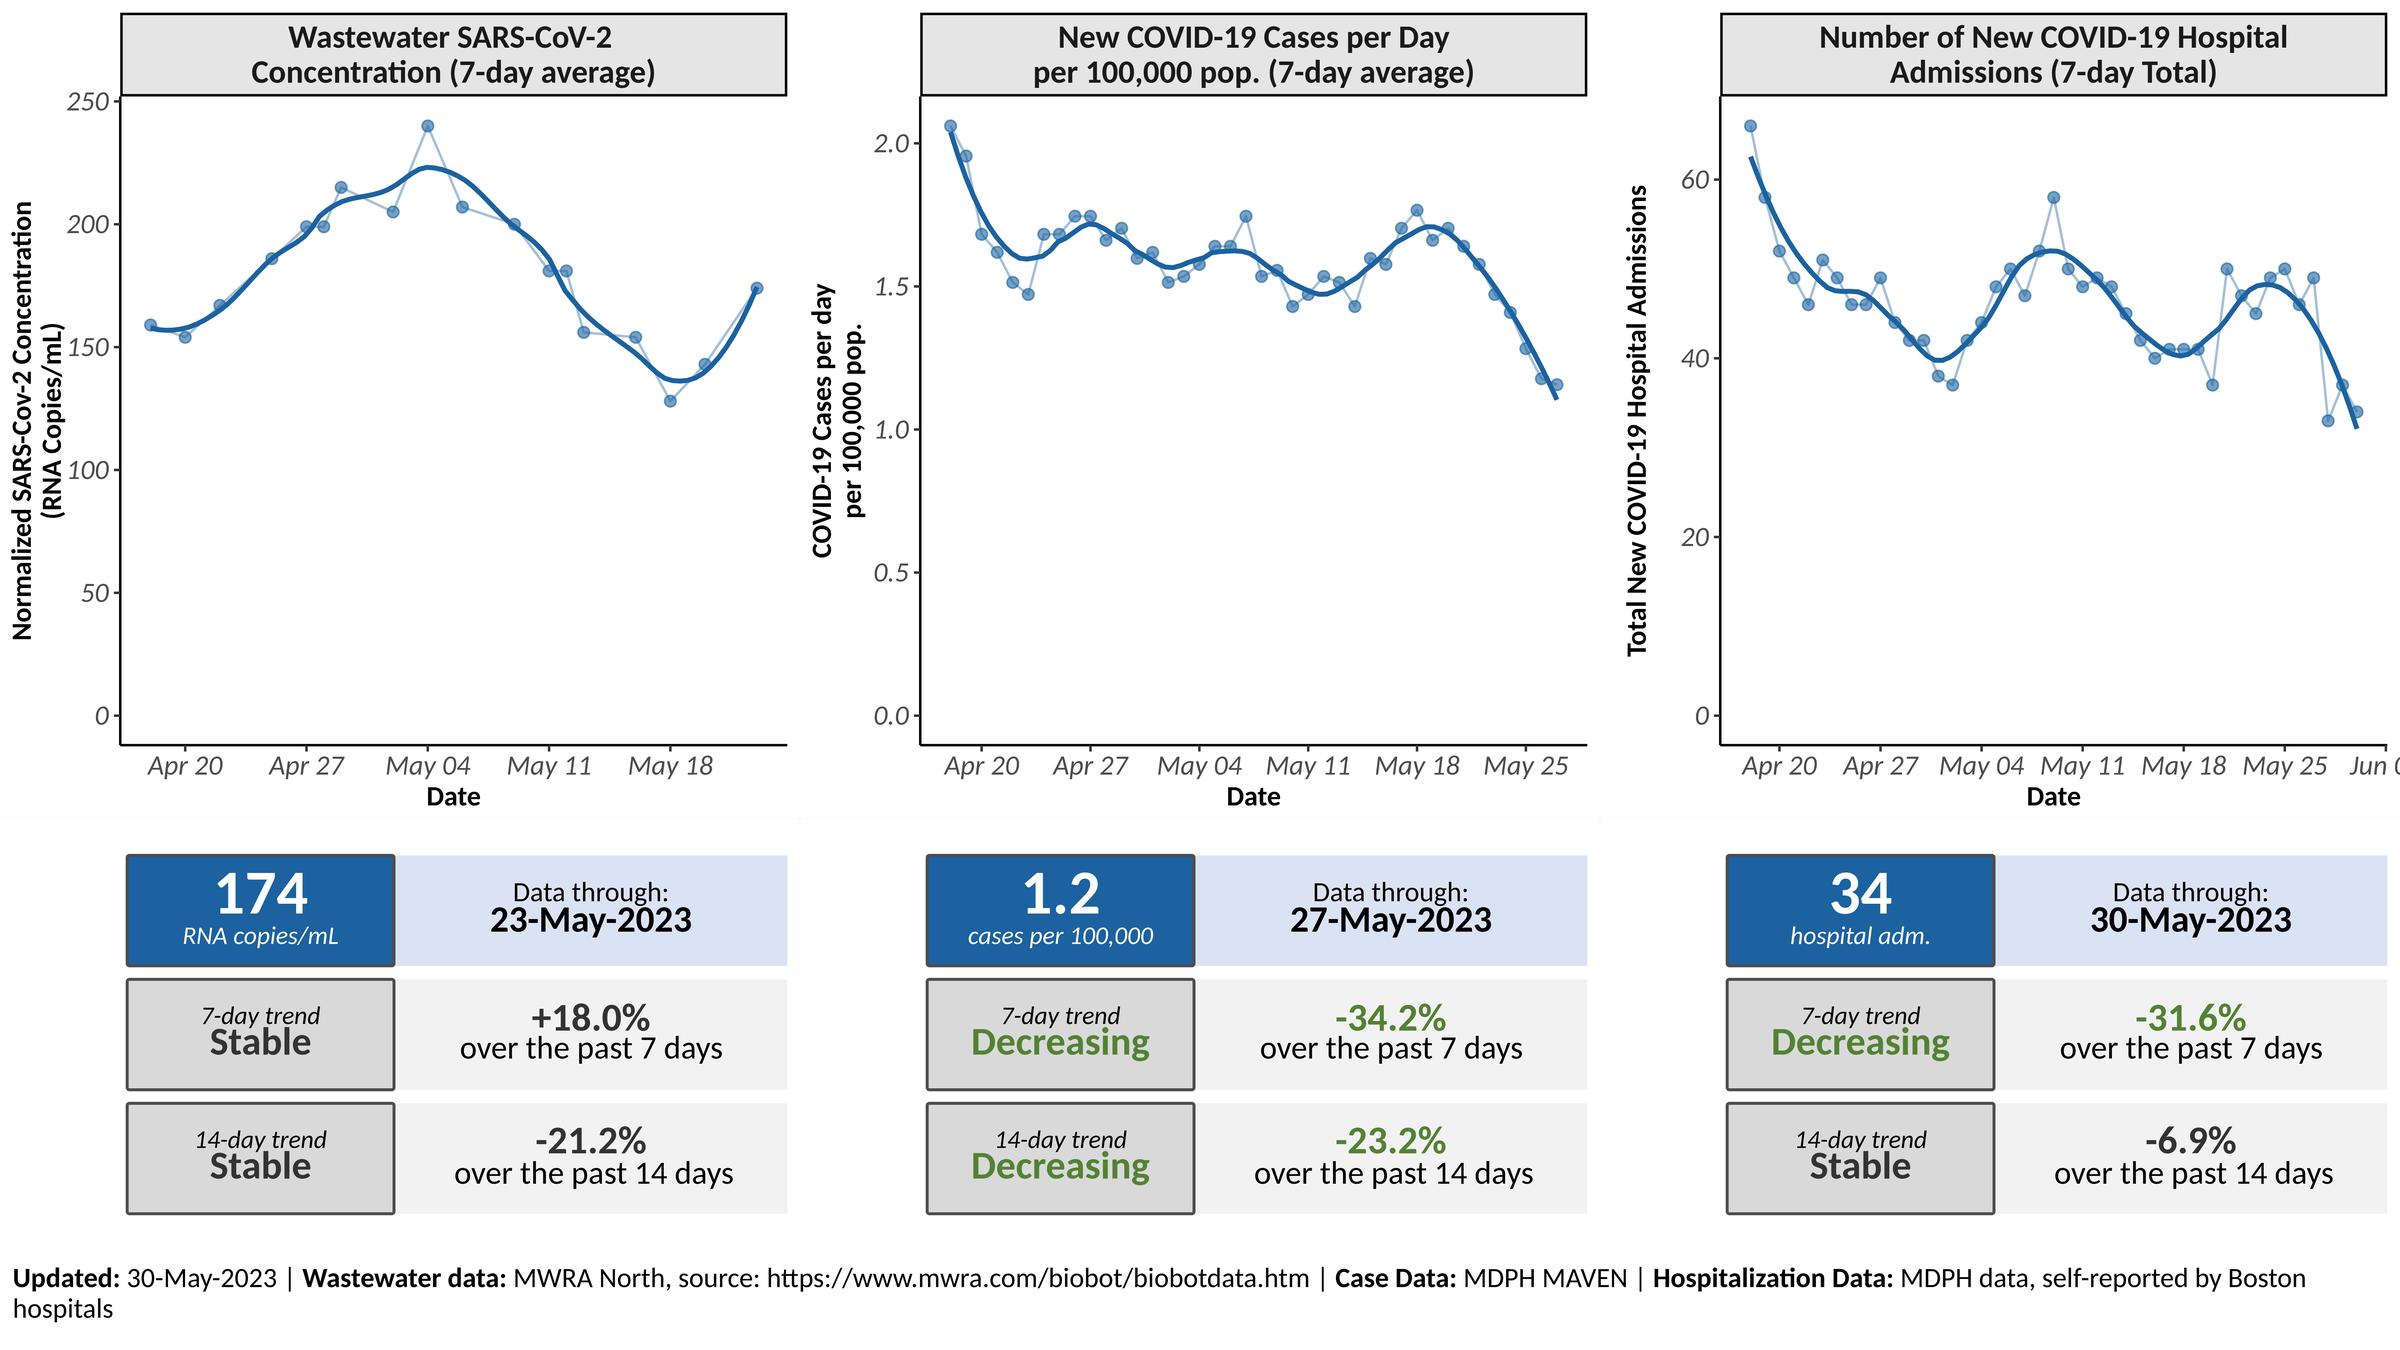 May 31, 2023 Boston COVID-19 Data: Wastewater through May 23, 174 copies/mL, 18% increase over 7 days (stable trend), 21.2% decrease over 14 days (stable trend); New cases per day through May 27, 1.2 cases per 100,000 residents, 34.2% decrease over 7 days (decreasing trend), 23.2% decrease over 14 days (decreasing trend); New hospital admissions through May 30 (7-day total): 34 new hospital admissions, 31.6% decrease over 7 days (stable trend), 6.9% decrease over 14 days (stable trend).   